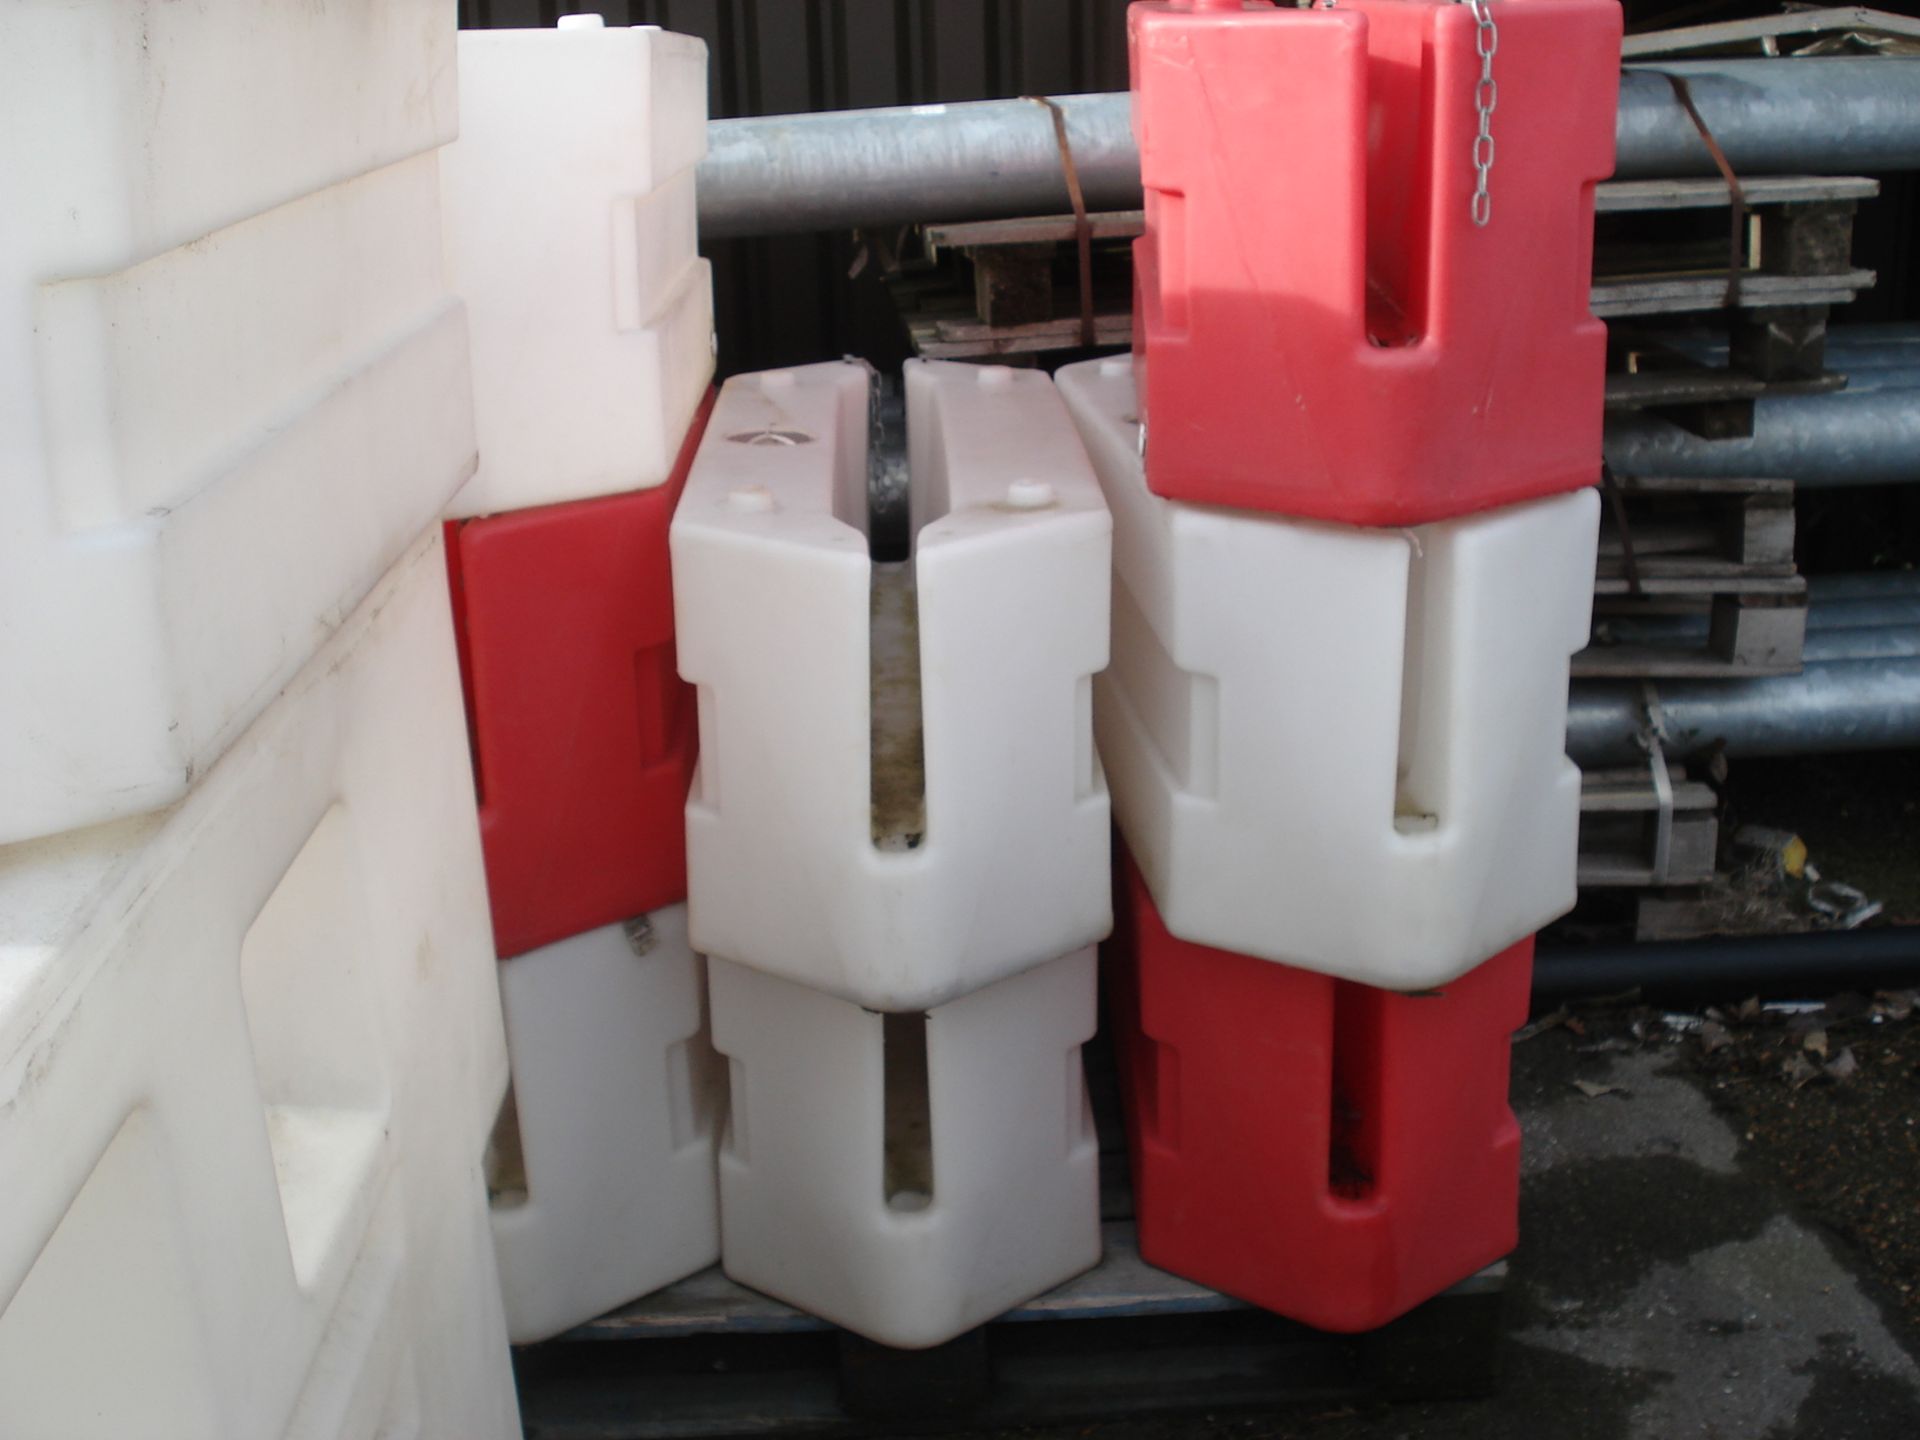 Red/White Plastic Pedestrian Safety Barriers x 20 - 37" Long x 15" Wide x 16" High - Image 4 of 5